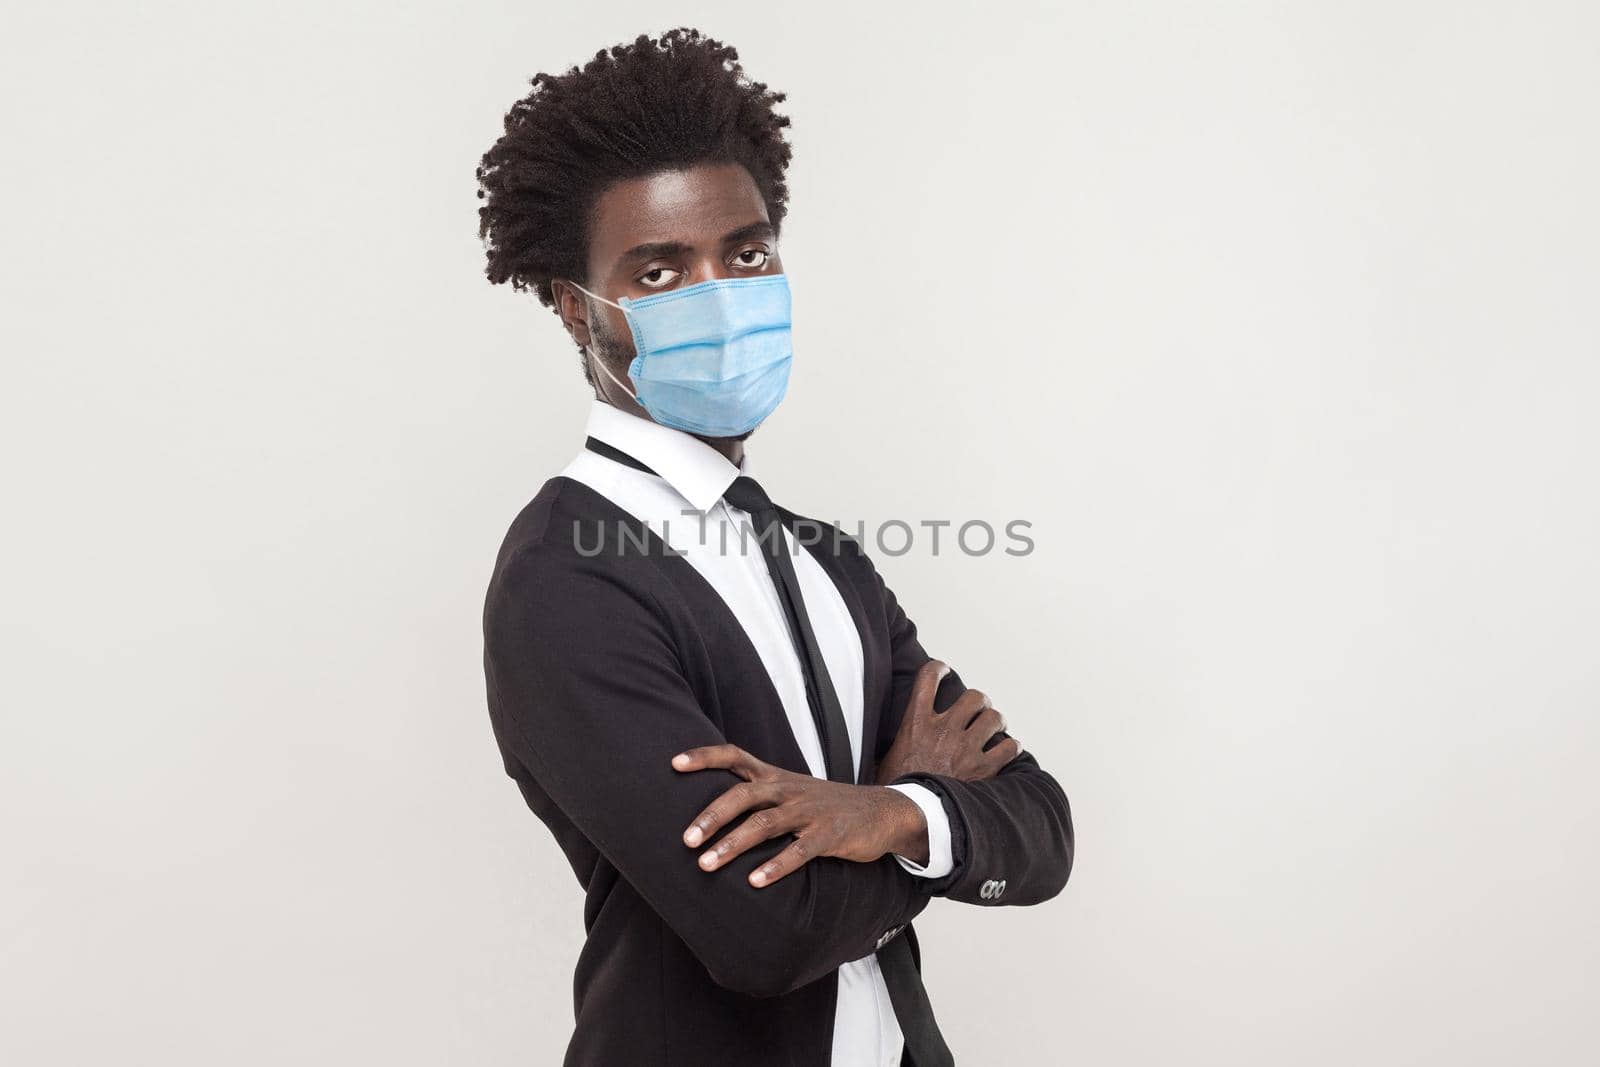 Protection against coronavirus. Alone man wearing hygienic mask to prevent infection, Covid-19. folded arms and looking at camera with sad worry face. indoor studio shot isolated on gray background